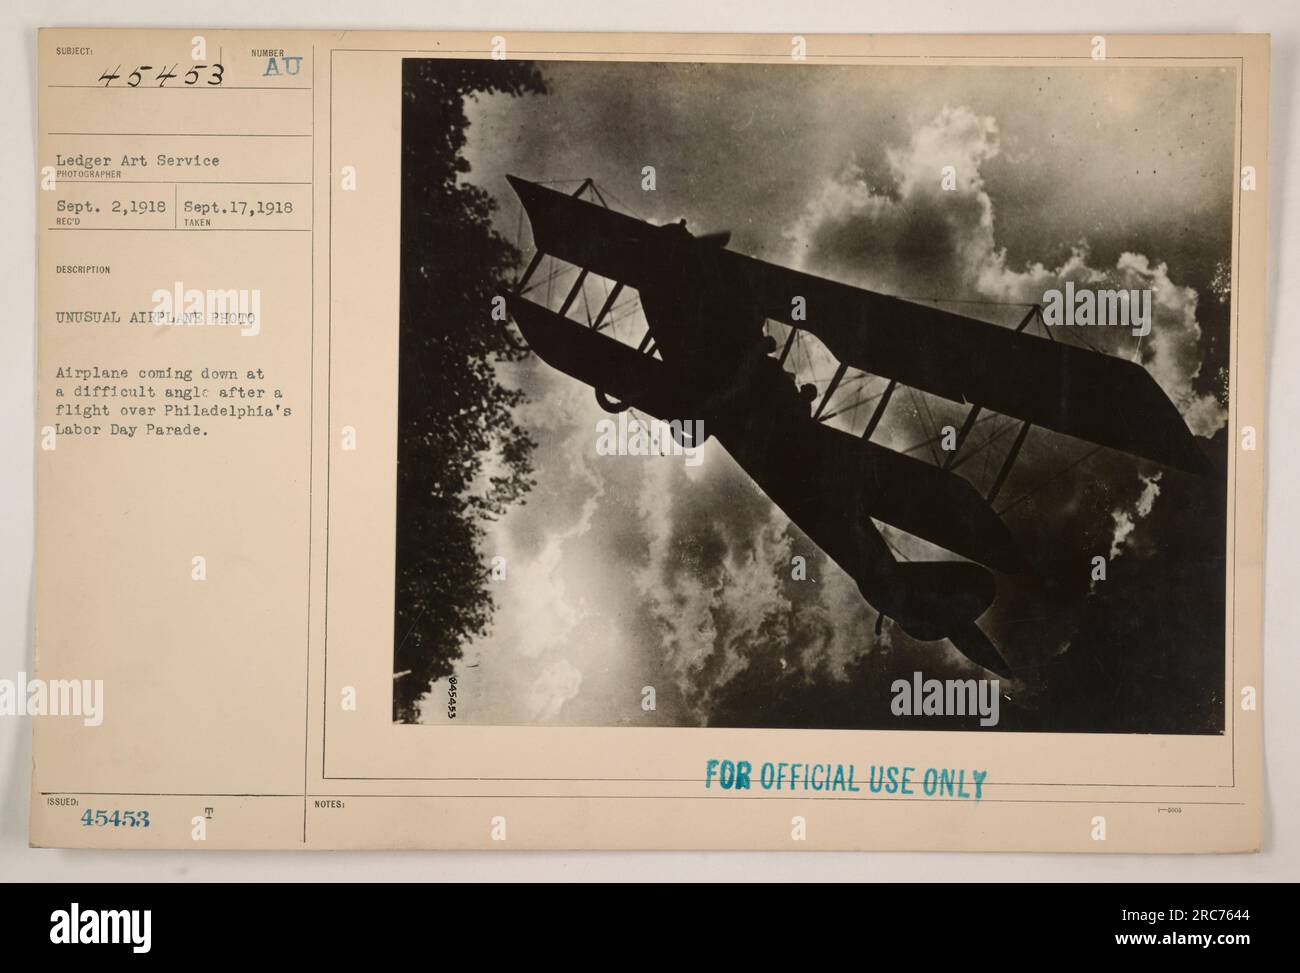 An airplane comes down at a difficult angle after a flight over Philadelphia's Labor Day Parade in September 1918. This image is labeled as 'unusual' and comes from the Ledger Art Service. It was taken between September 2, 1918 and September 17, 1918. The photo includes a number (45453) and a note indicating that it is for official use only. Stock Photo